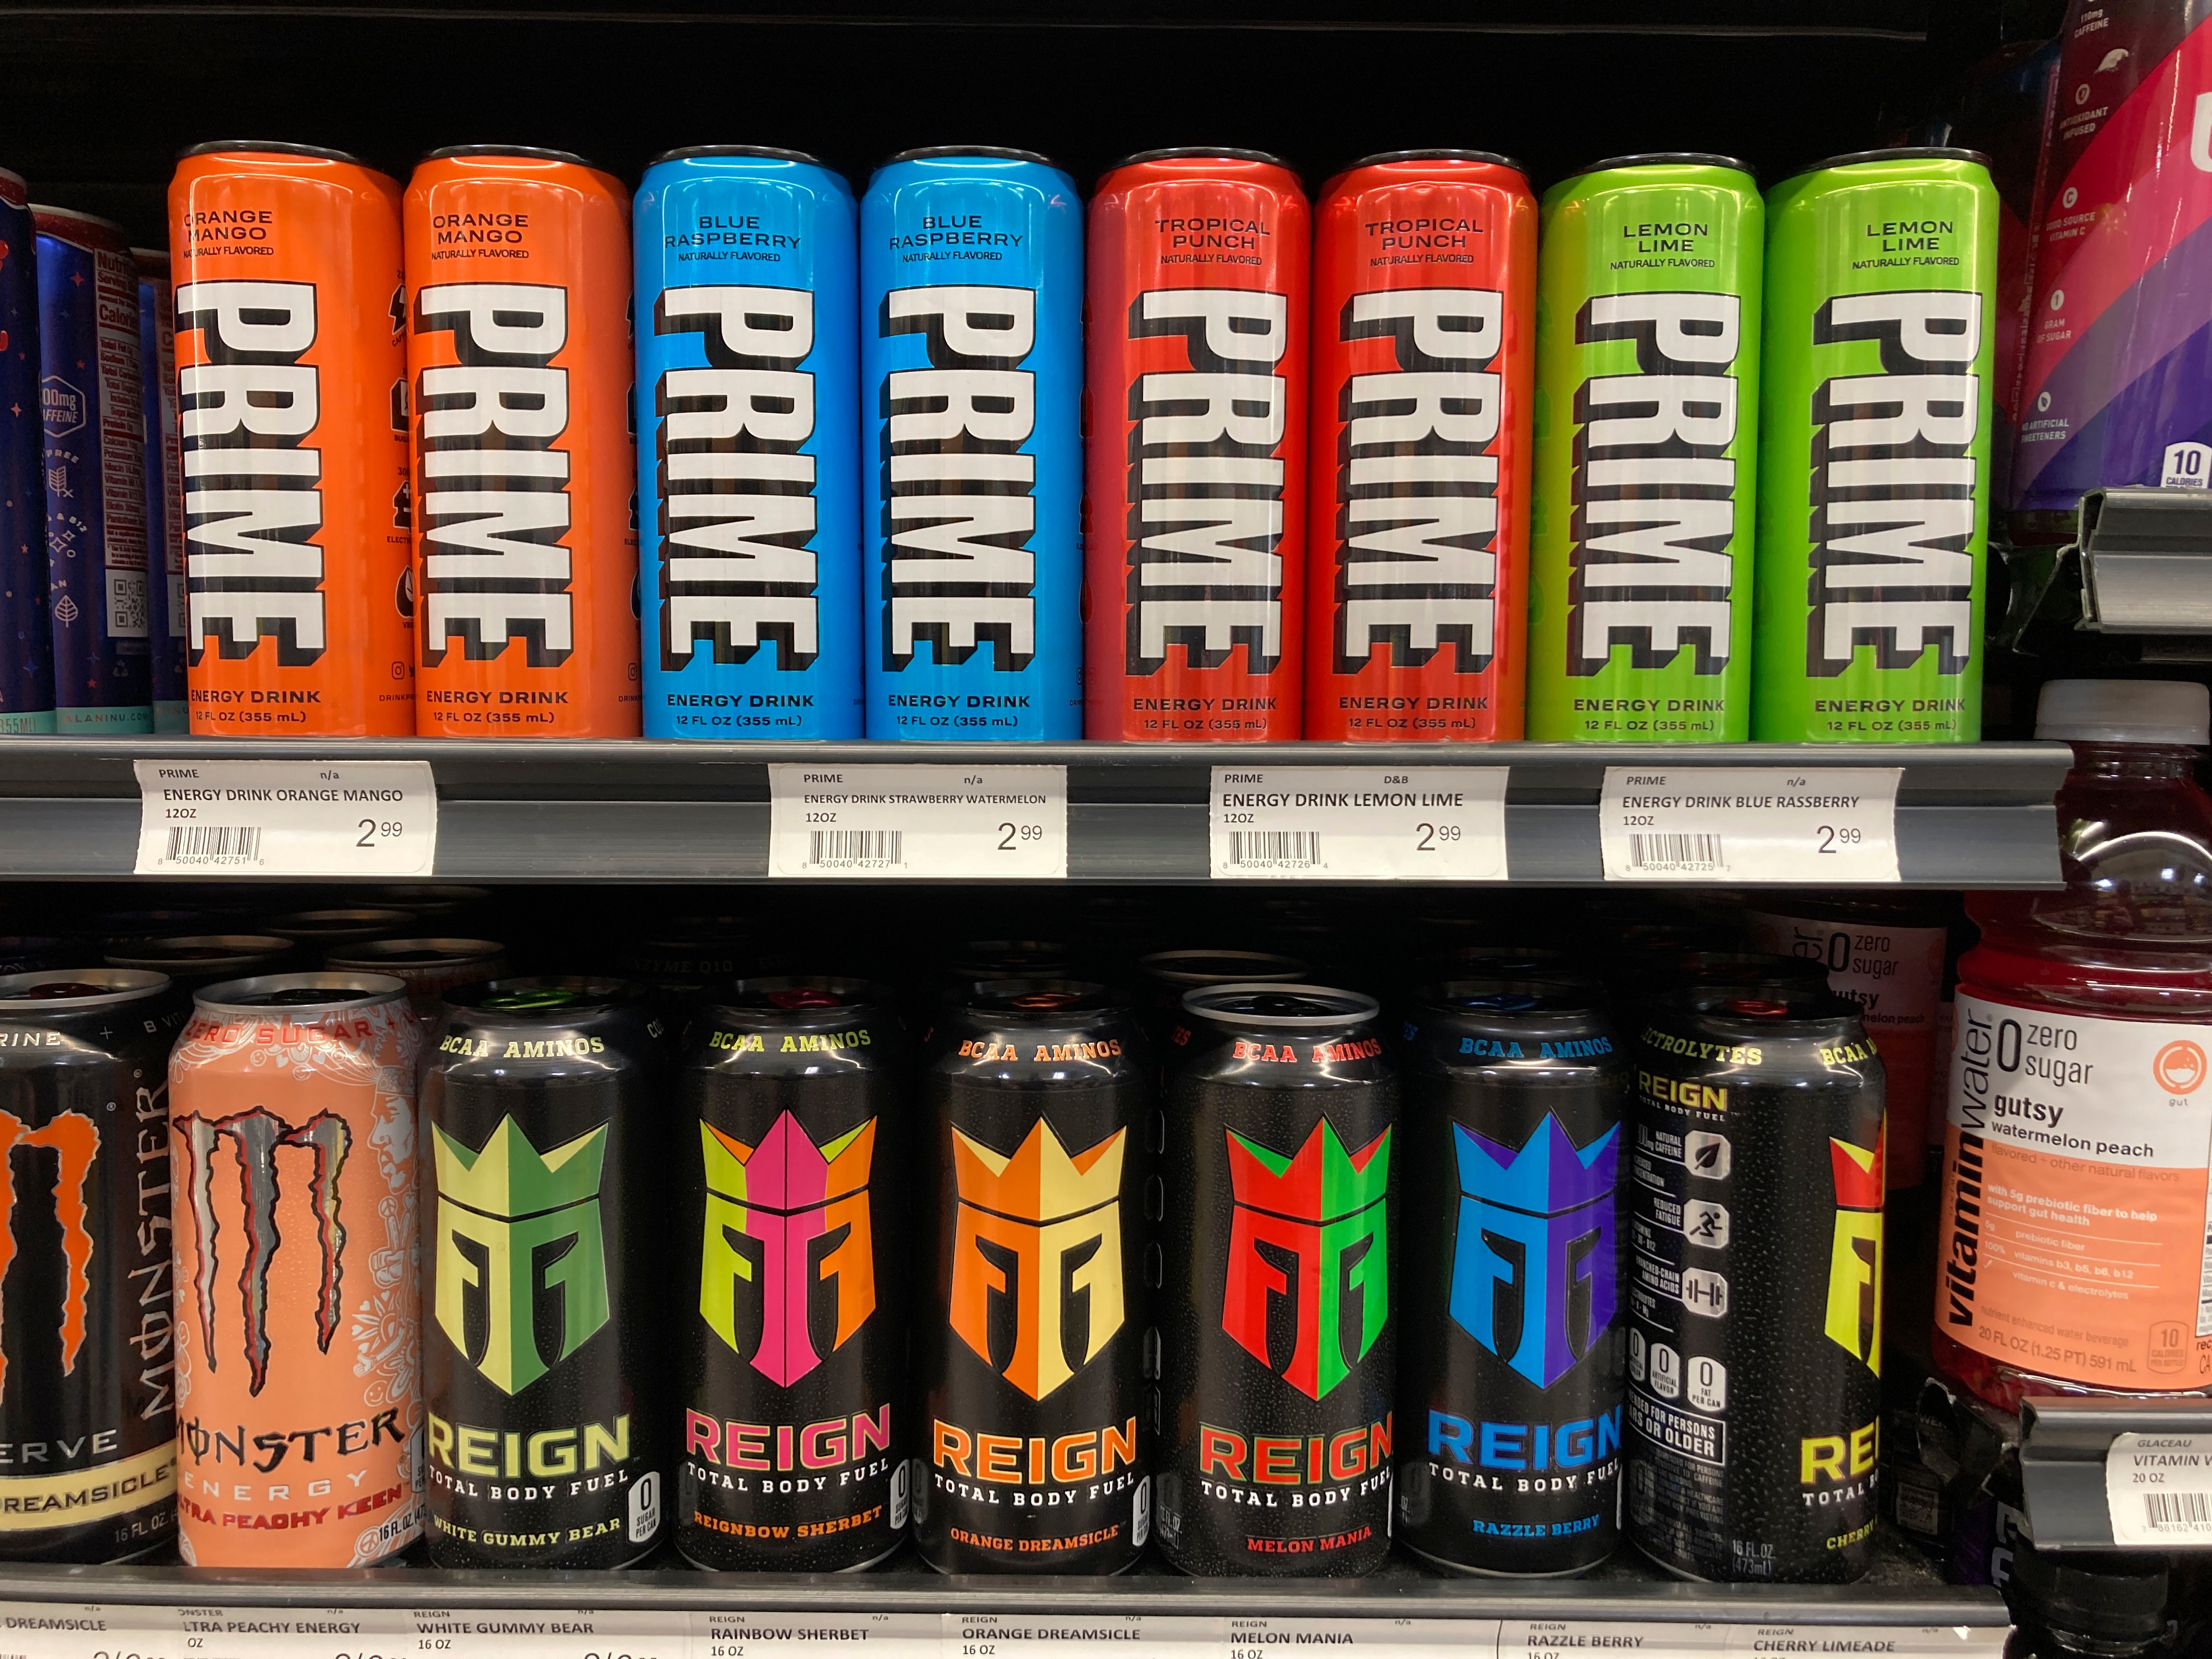 6 More Energy Drink Brands Recalled by Health Canada for Excessive